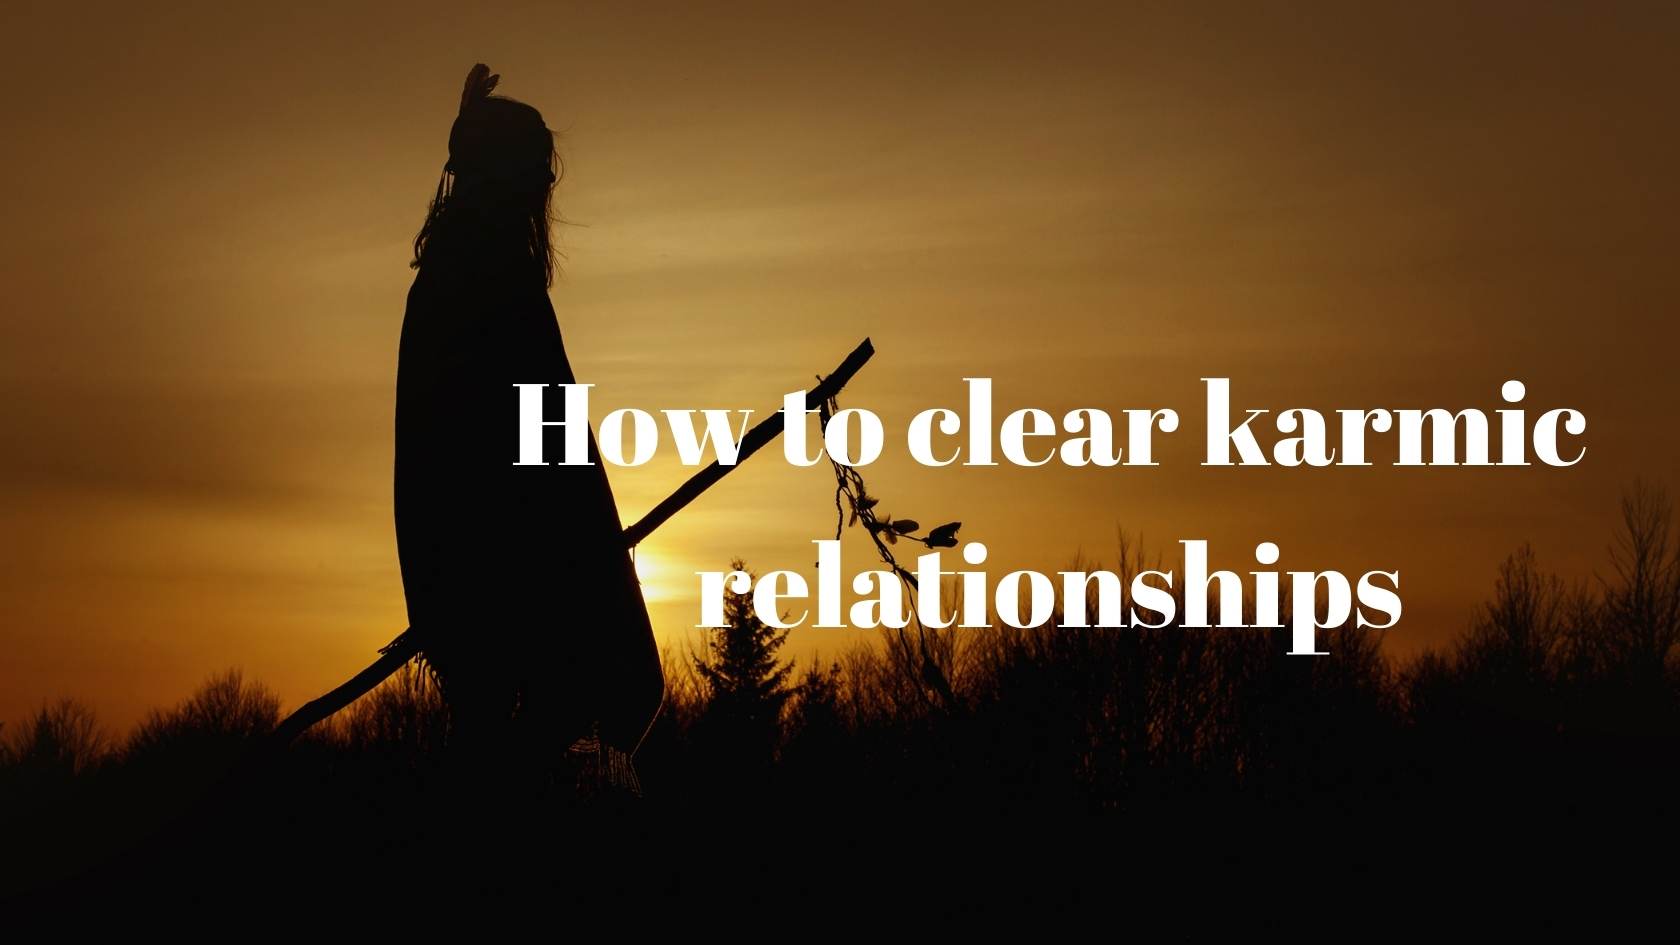 How to release karmic relationships